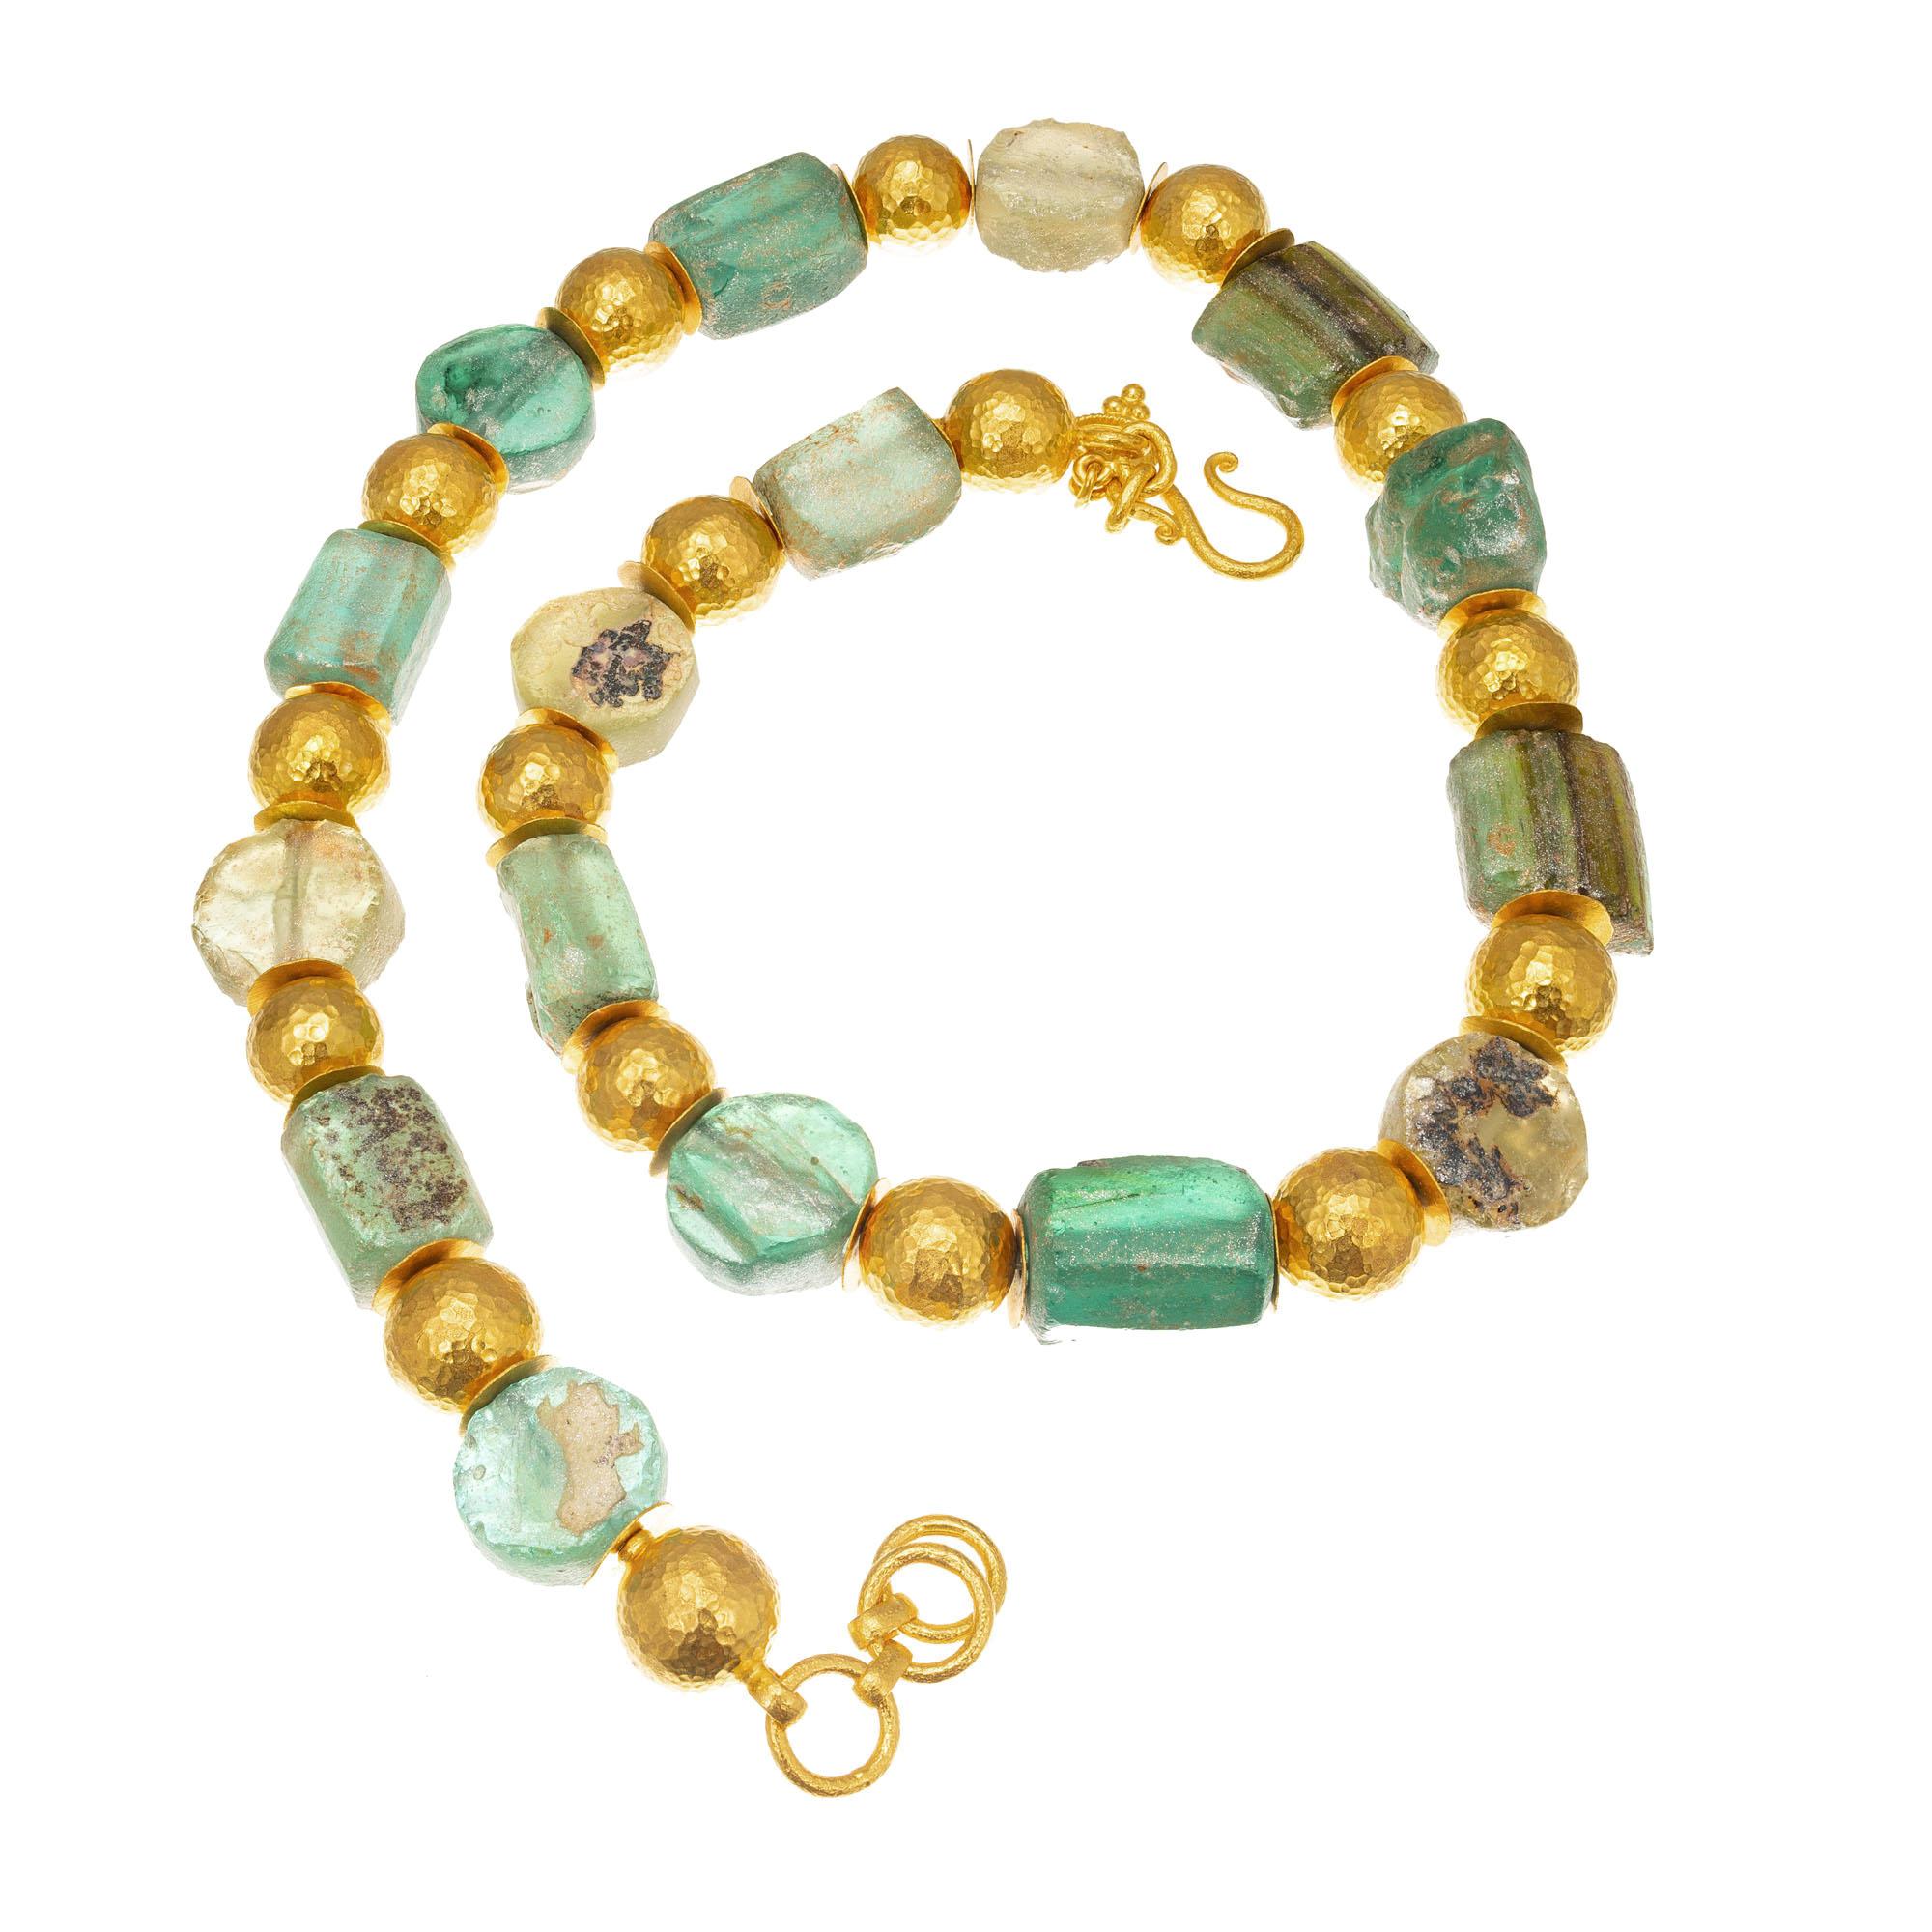 24k yellow hand hammered gold spheres spaced with authentic Ancient Roman glass beads showing a metallic patina from the oxidation of metals.  

22/24k yellow gold
Stamped: 985
Hallmark: ARA
84.4 grams
Top to bottom: 11.5mm or 9/16 Inch
Width: